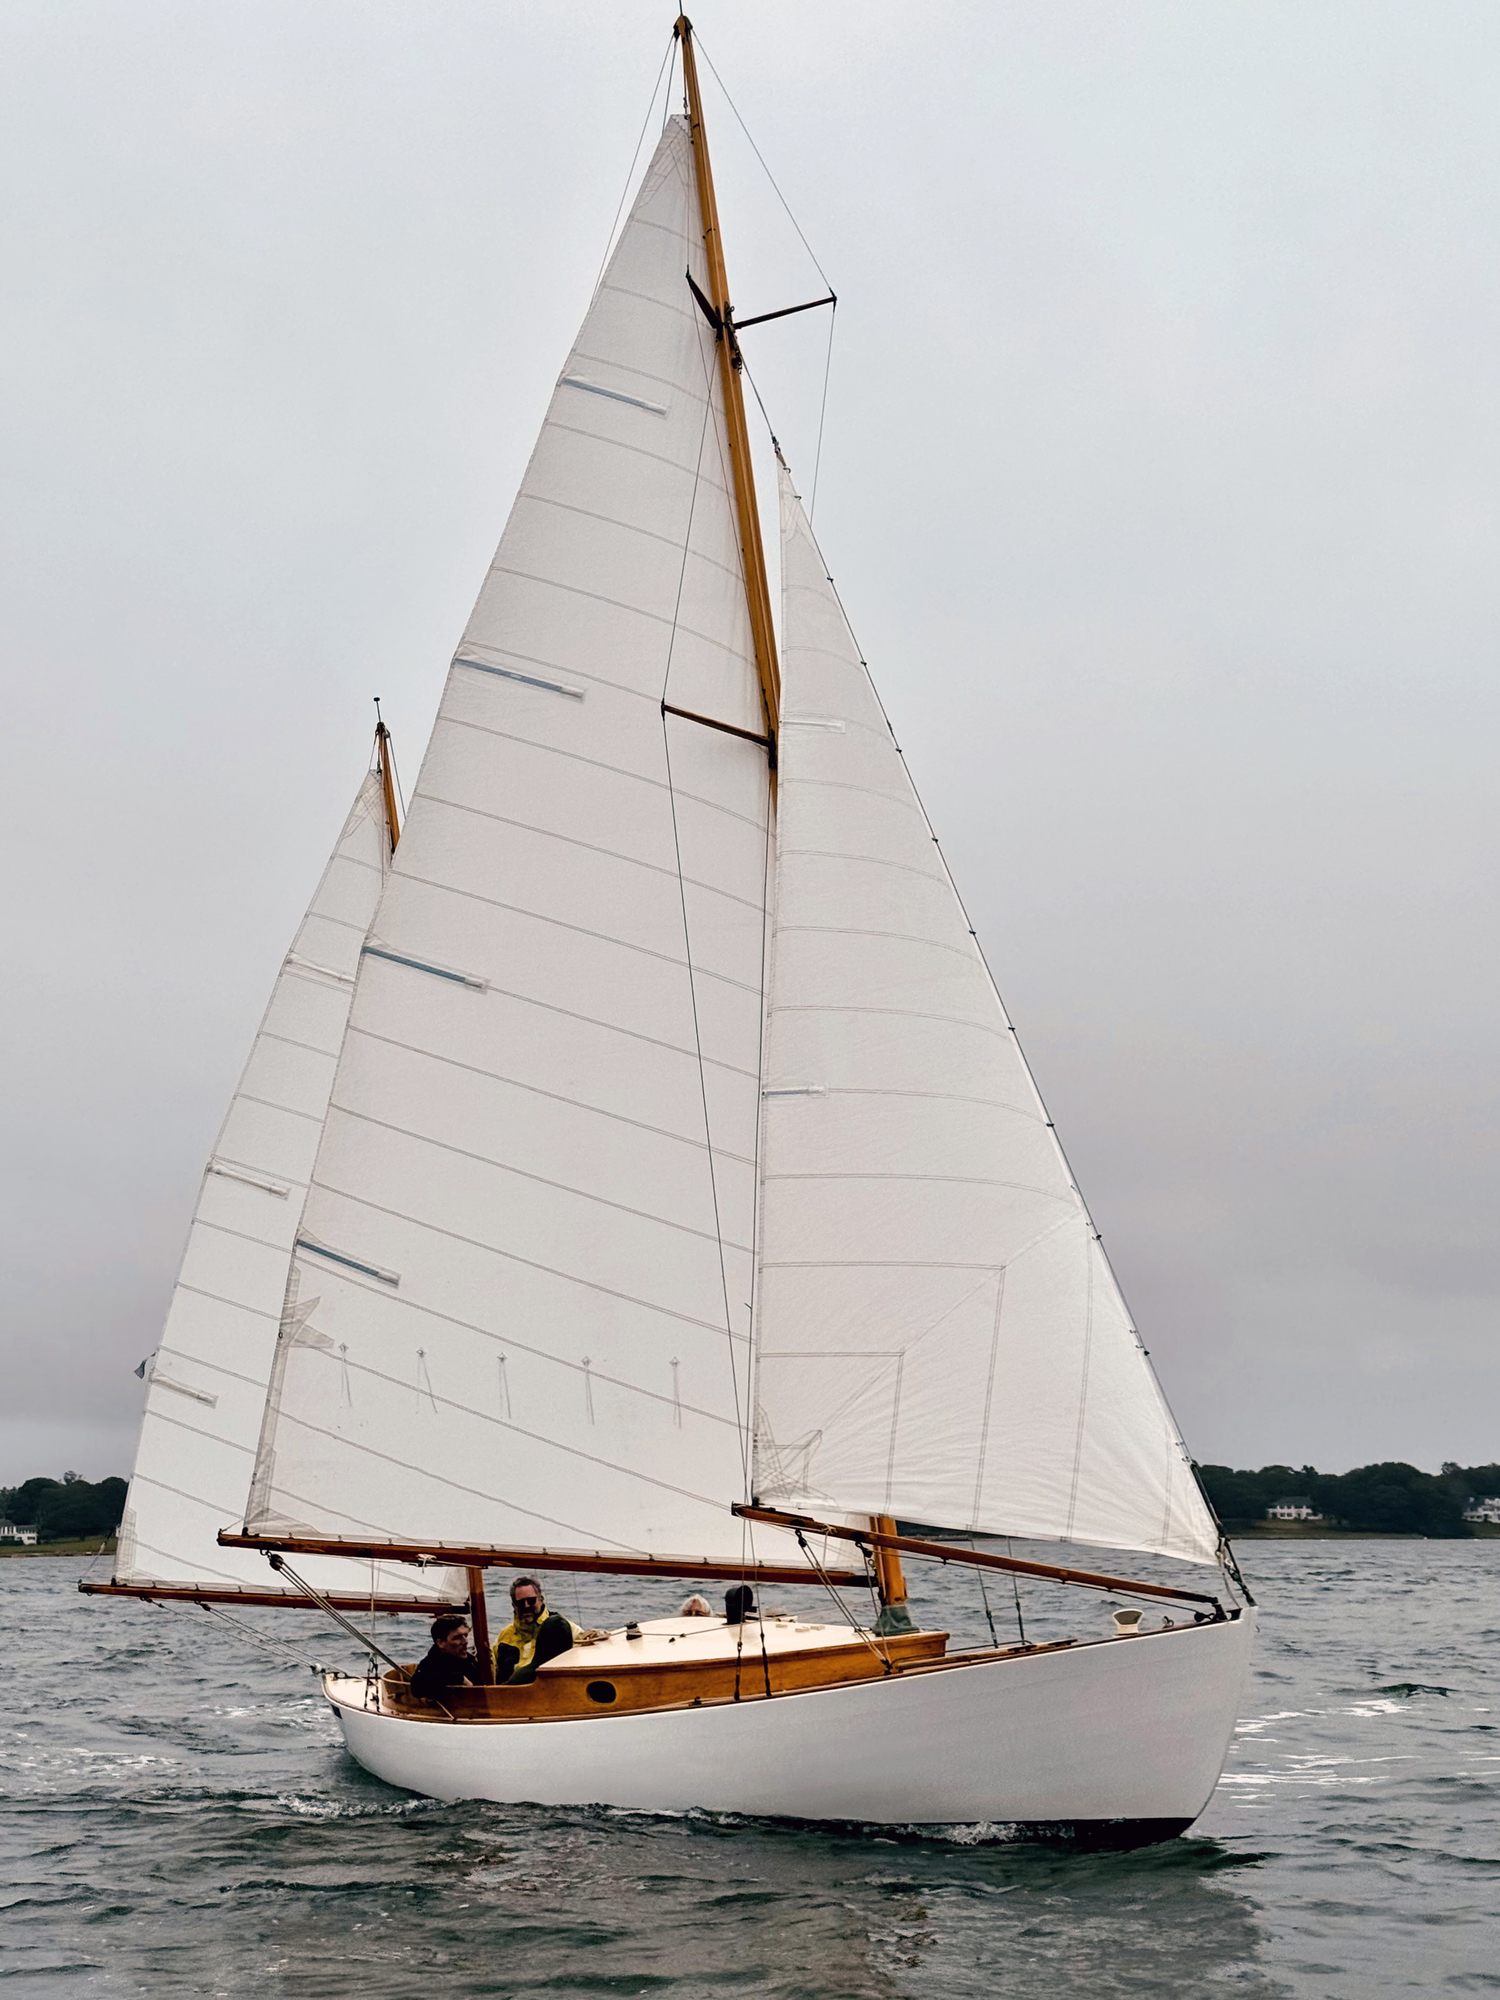 Pat Mundus’s engineless wood double-ended ketch Tern, a 1952 Herreshoff design, custom built By O. Lie-Nielsen in Maine 47 years ago shows the near 70-yacht fleet a bit of old world charm.
MICHAEL MELLA